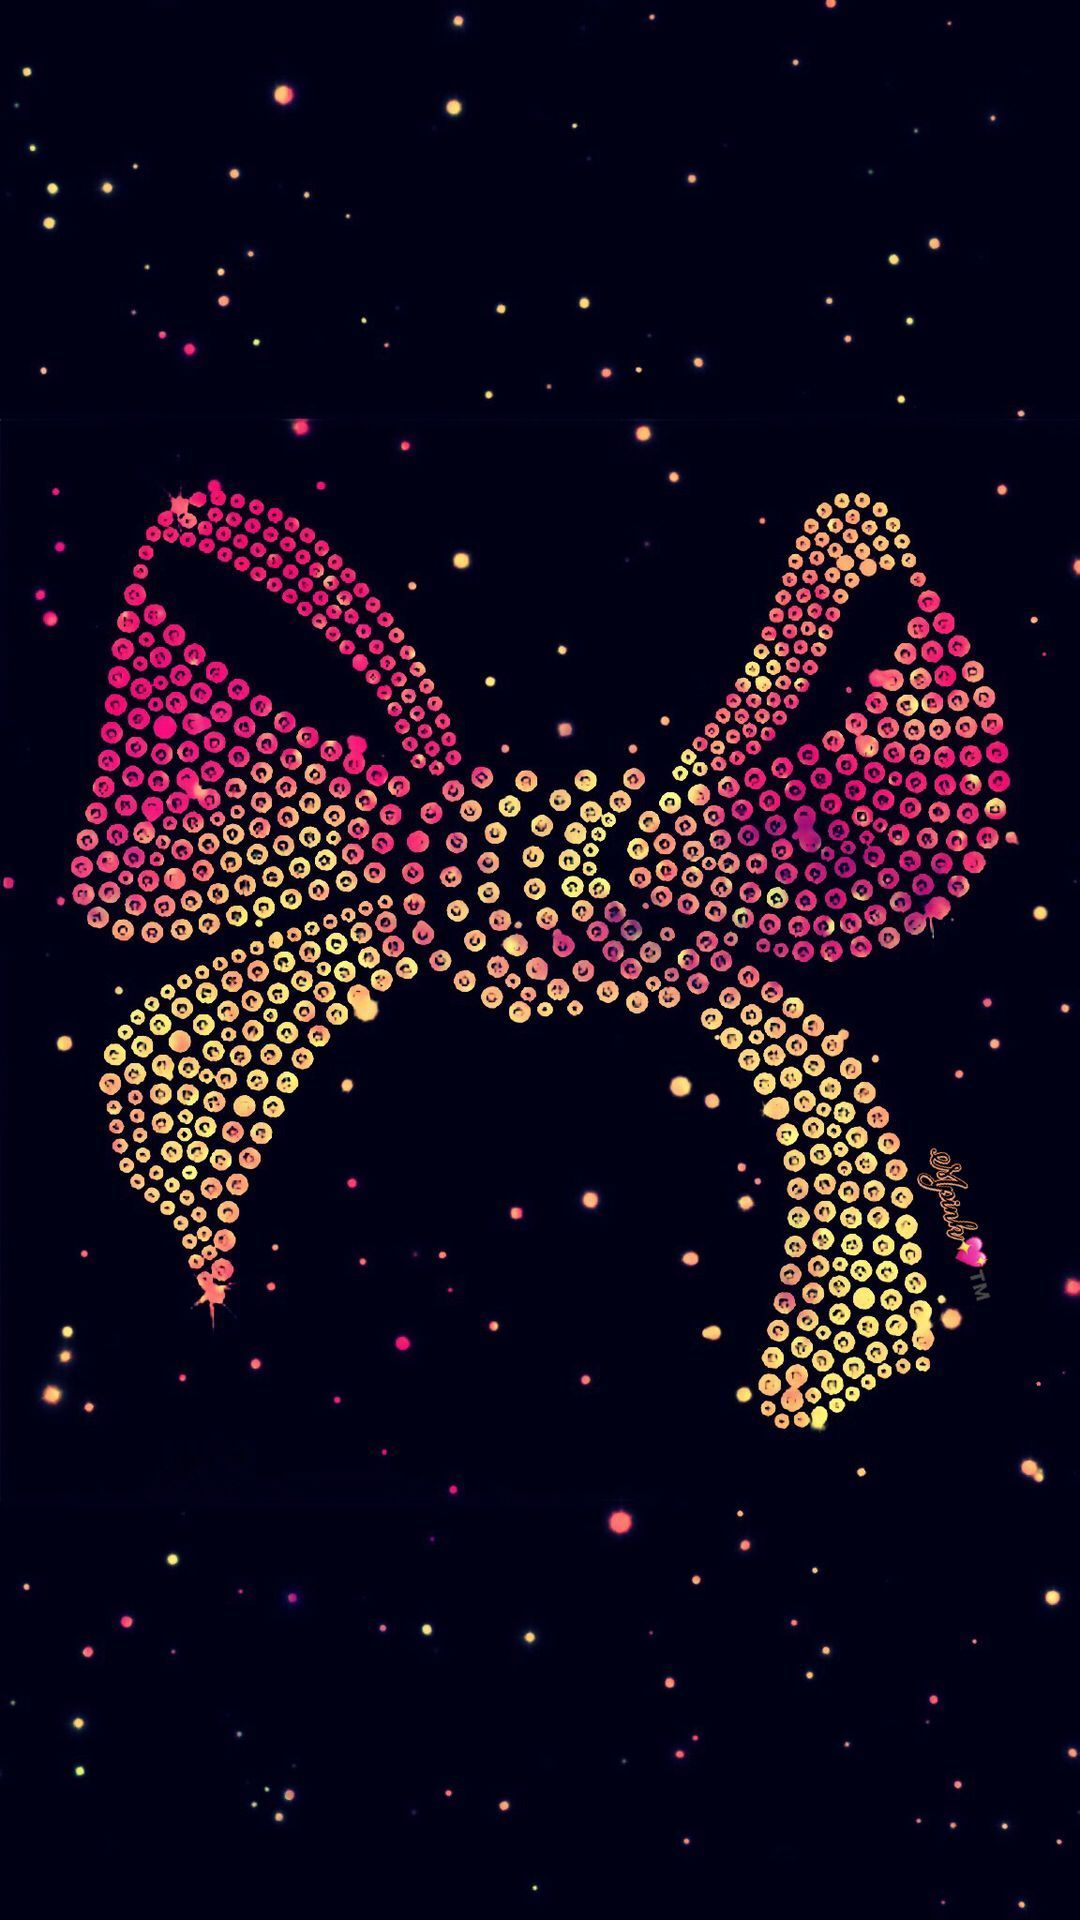 Girly Pink Black Wallpaper Mobile. Bow wallpaper iphone, Bow wallpaper, Flower phone wallpaper